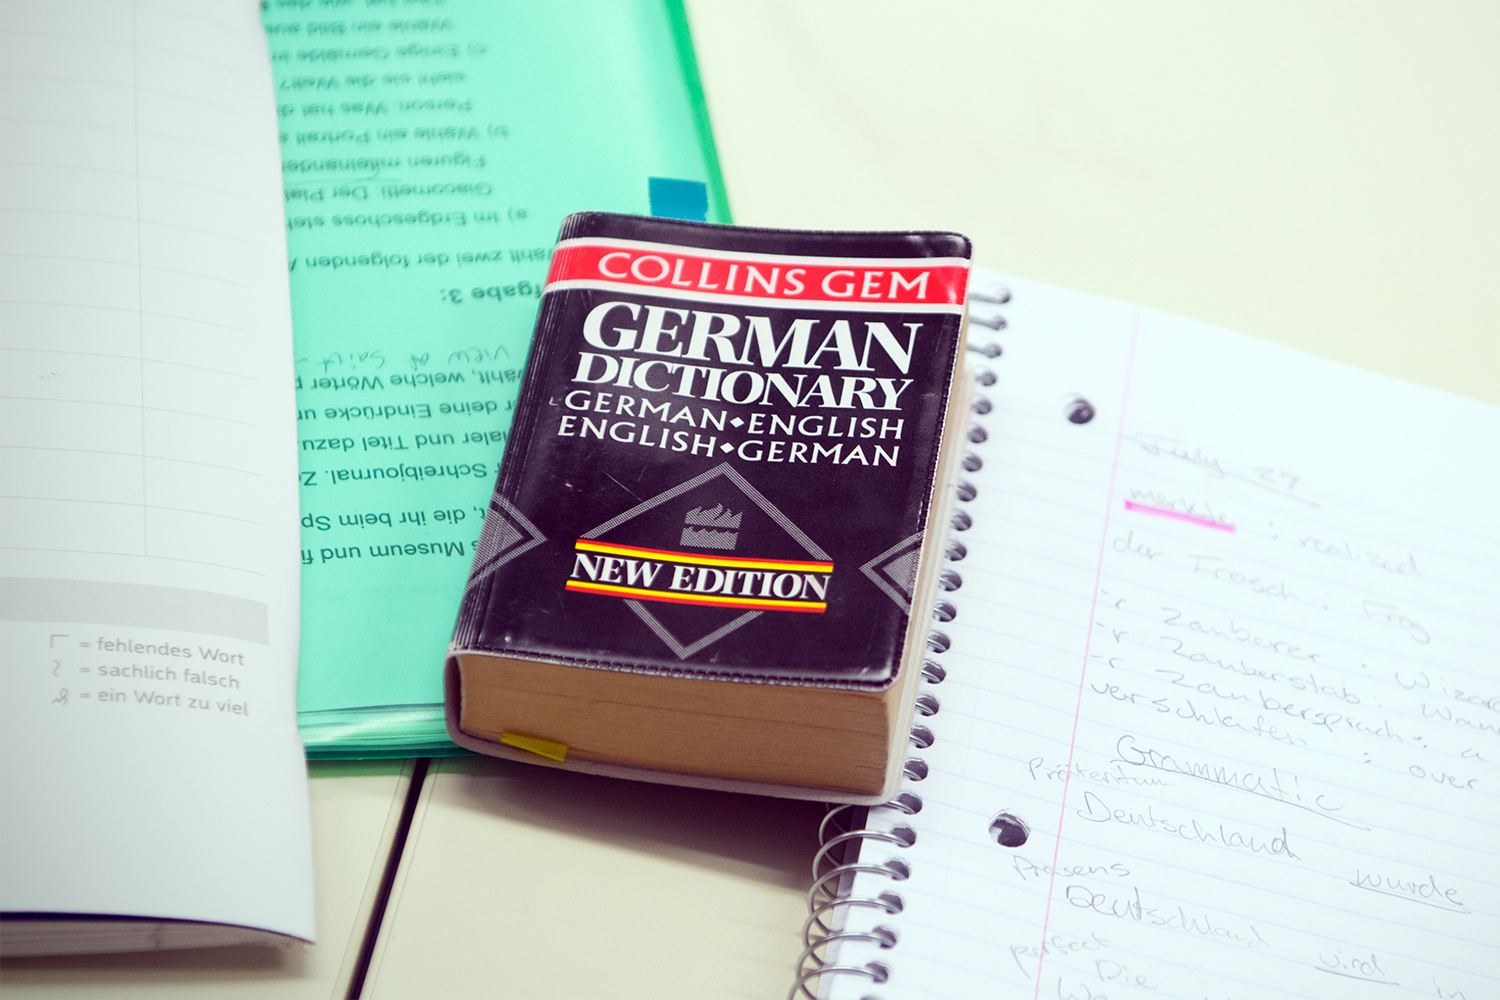 German dictionary on a table